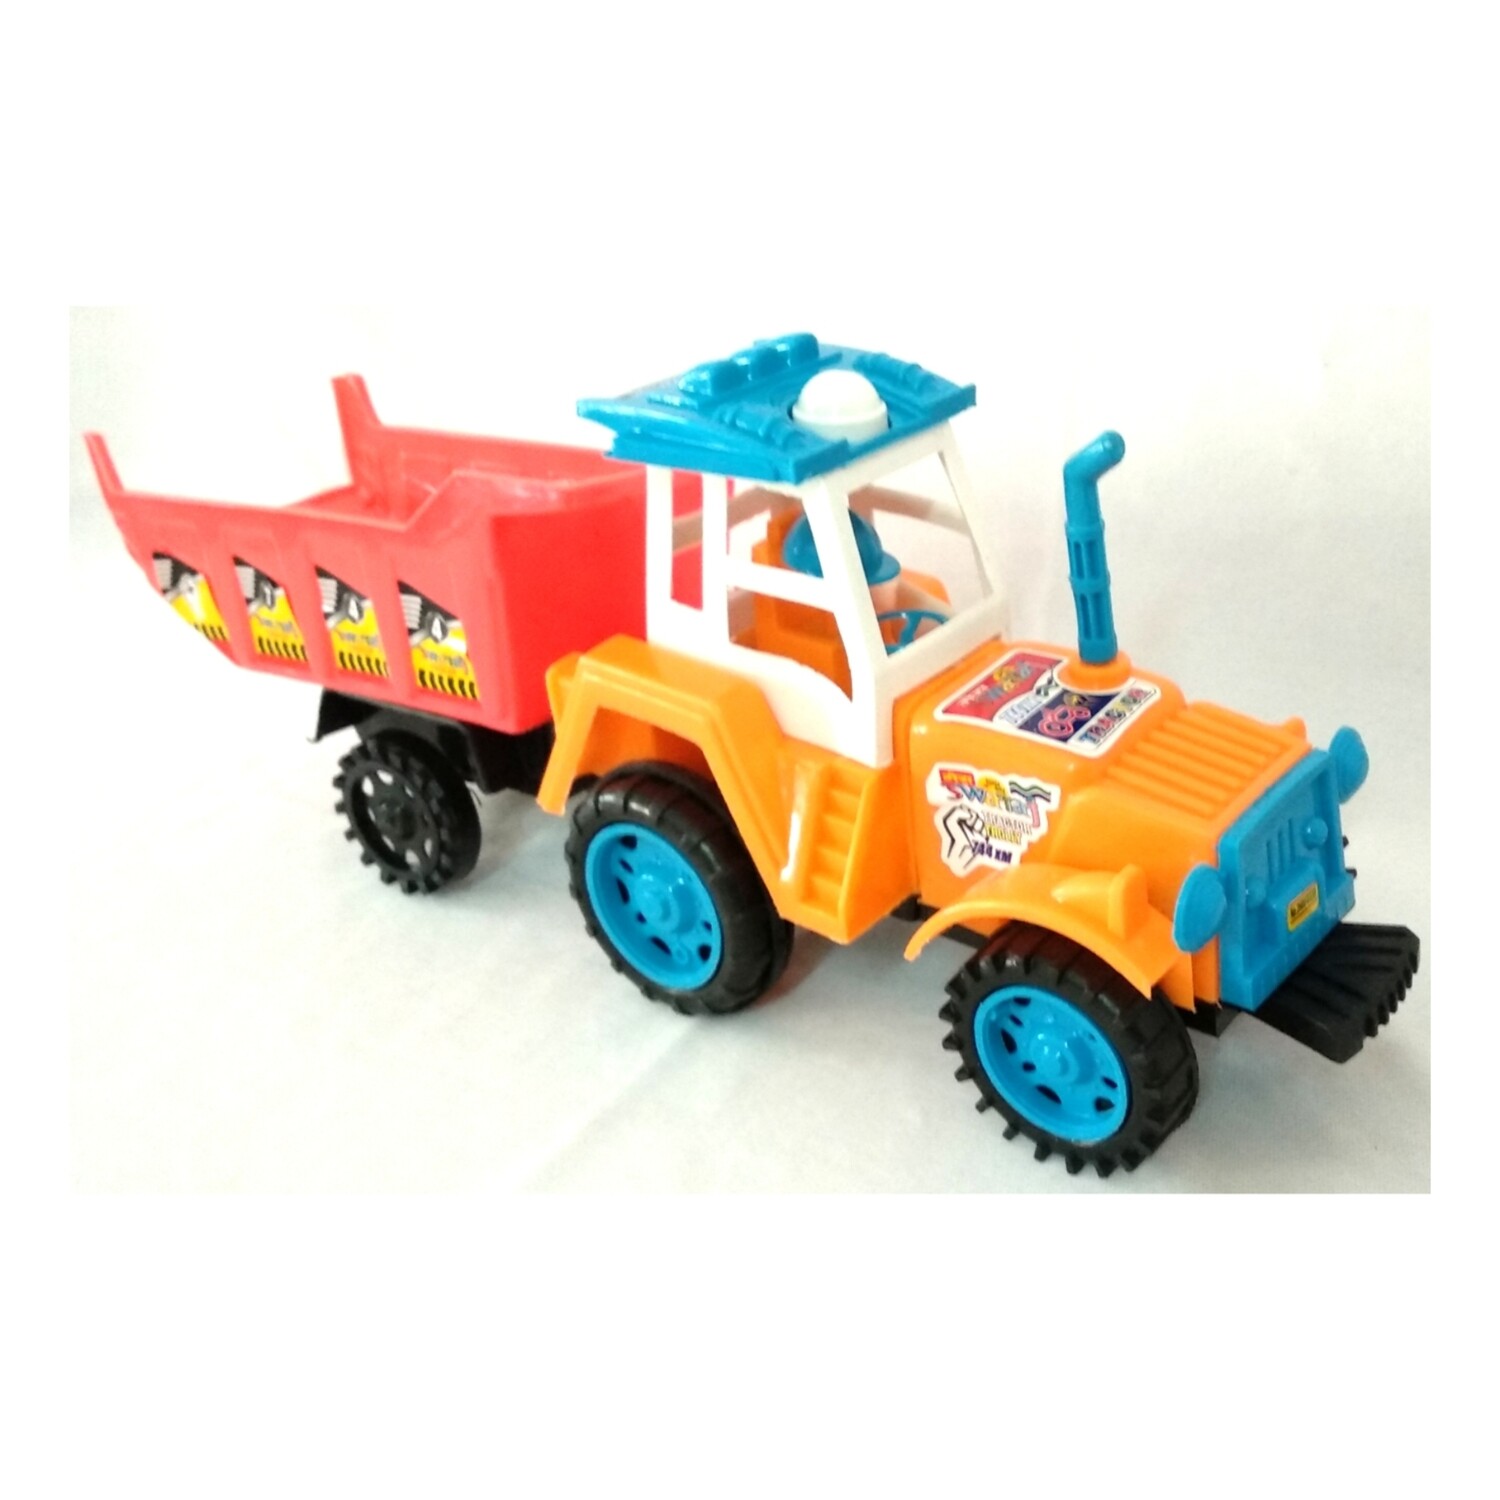 Swaraj Trolly Tractor Friction Powered Toy For Kids (Colour May Vary)